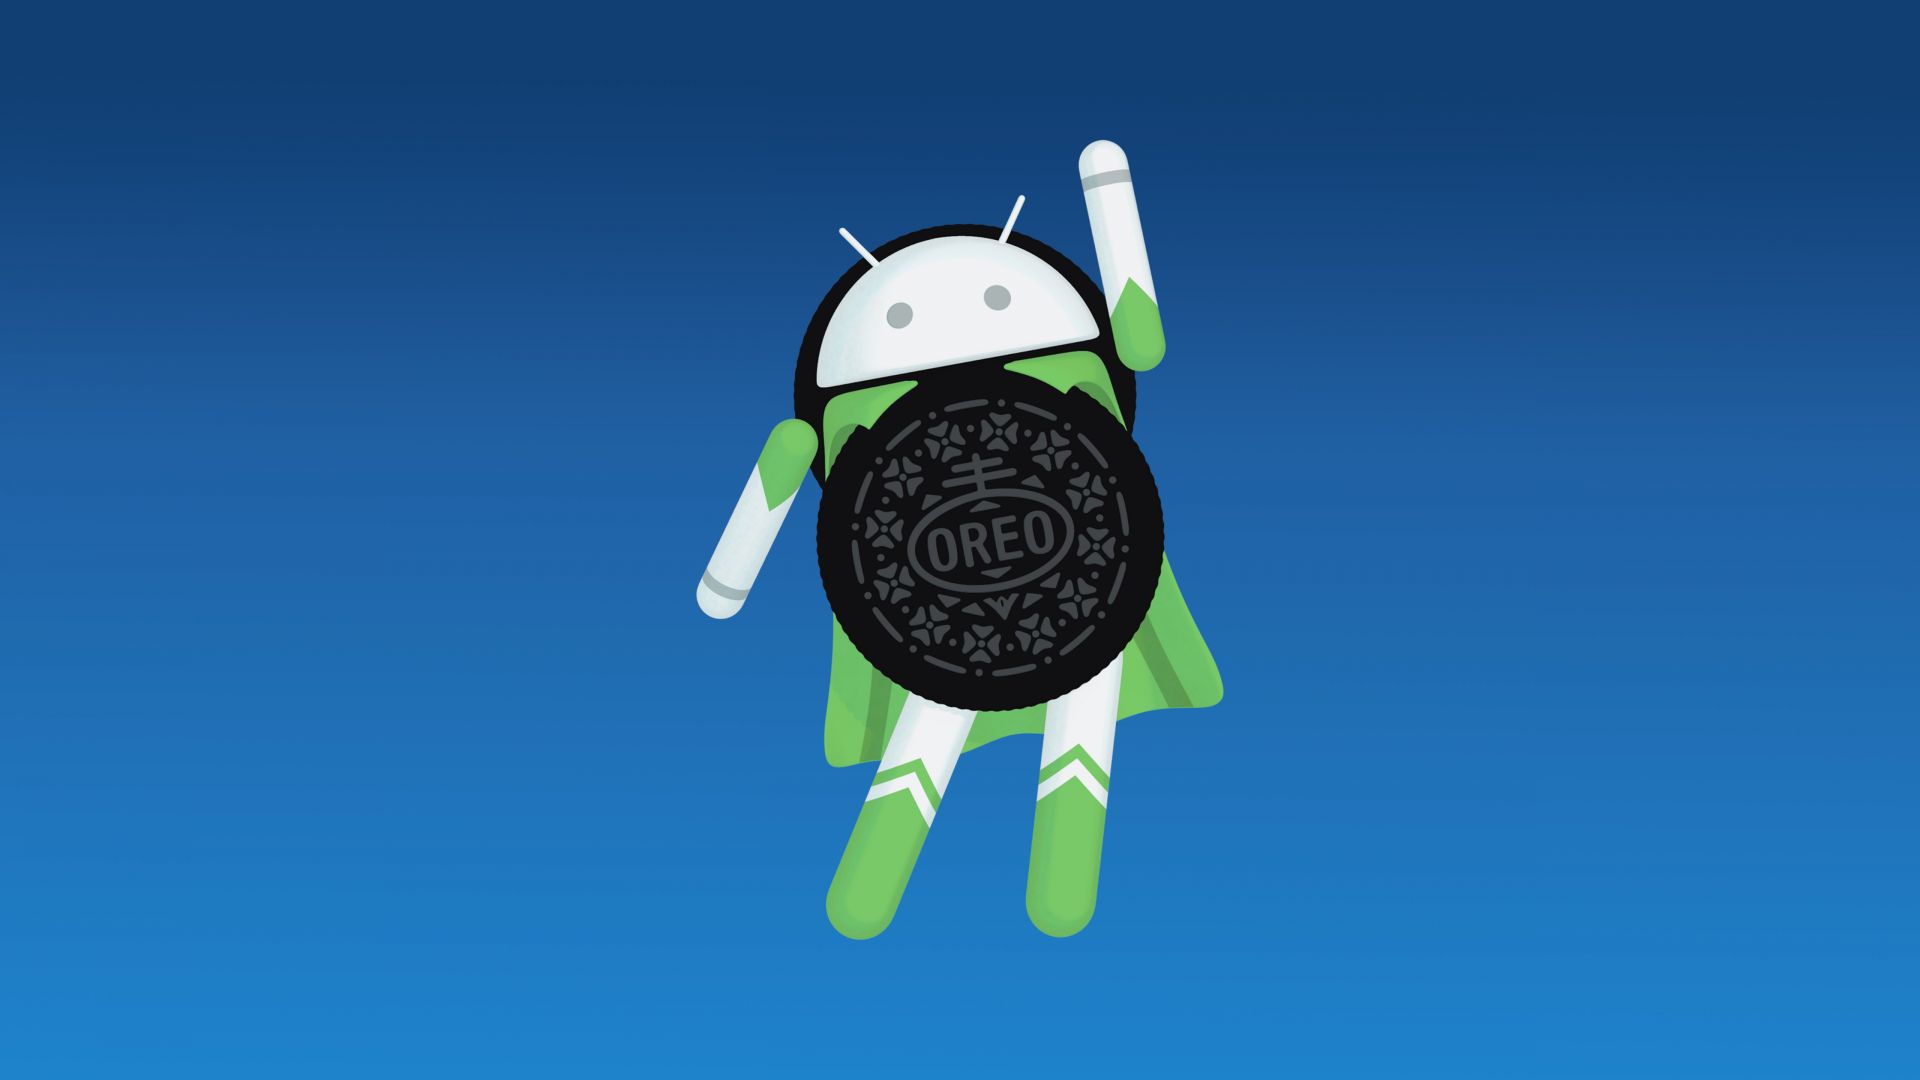 Desktop Wallpaper Android Oreo Logo 4k Hd Image Picture Background 6eb9d8